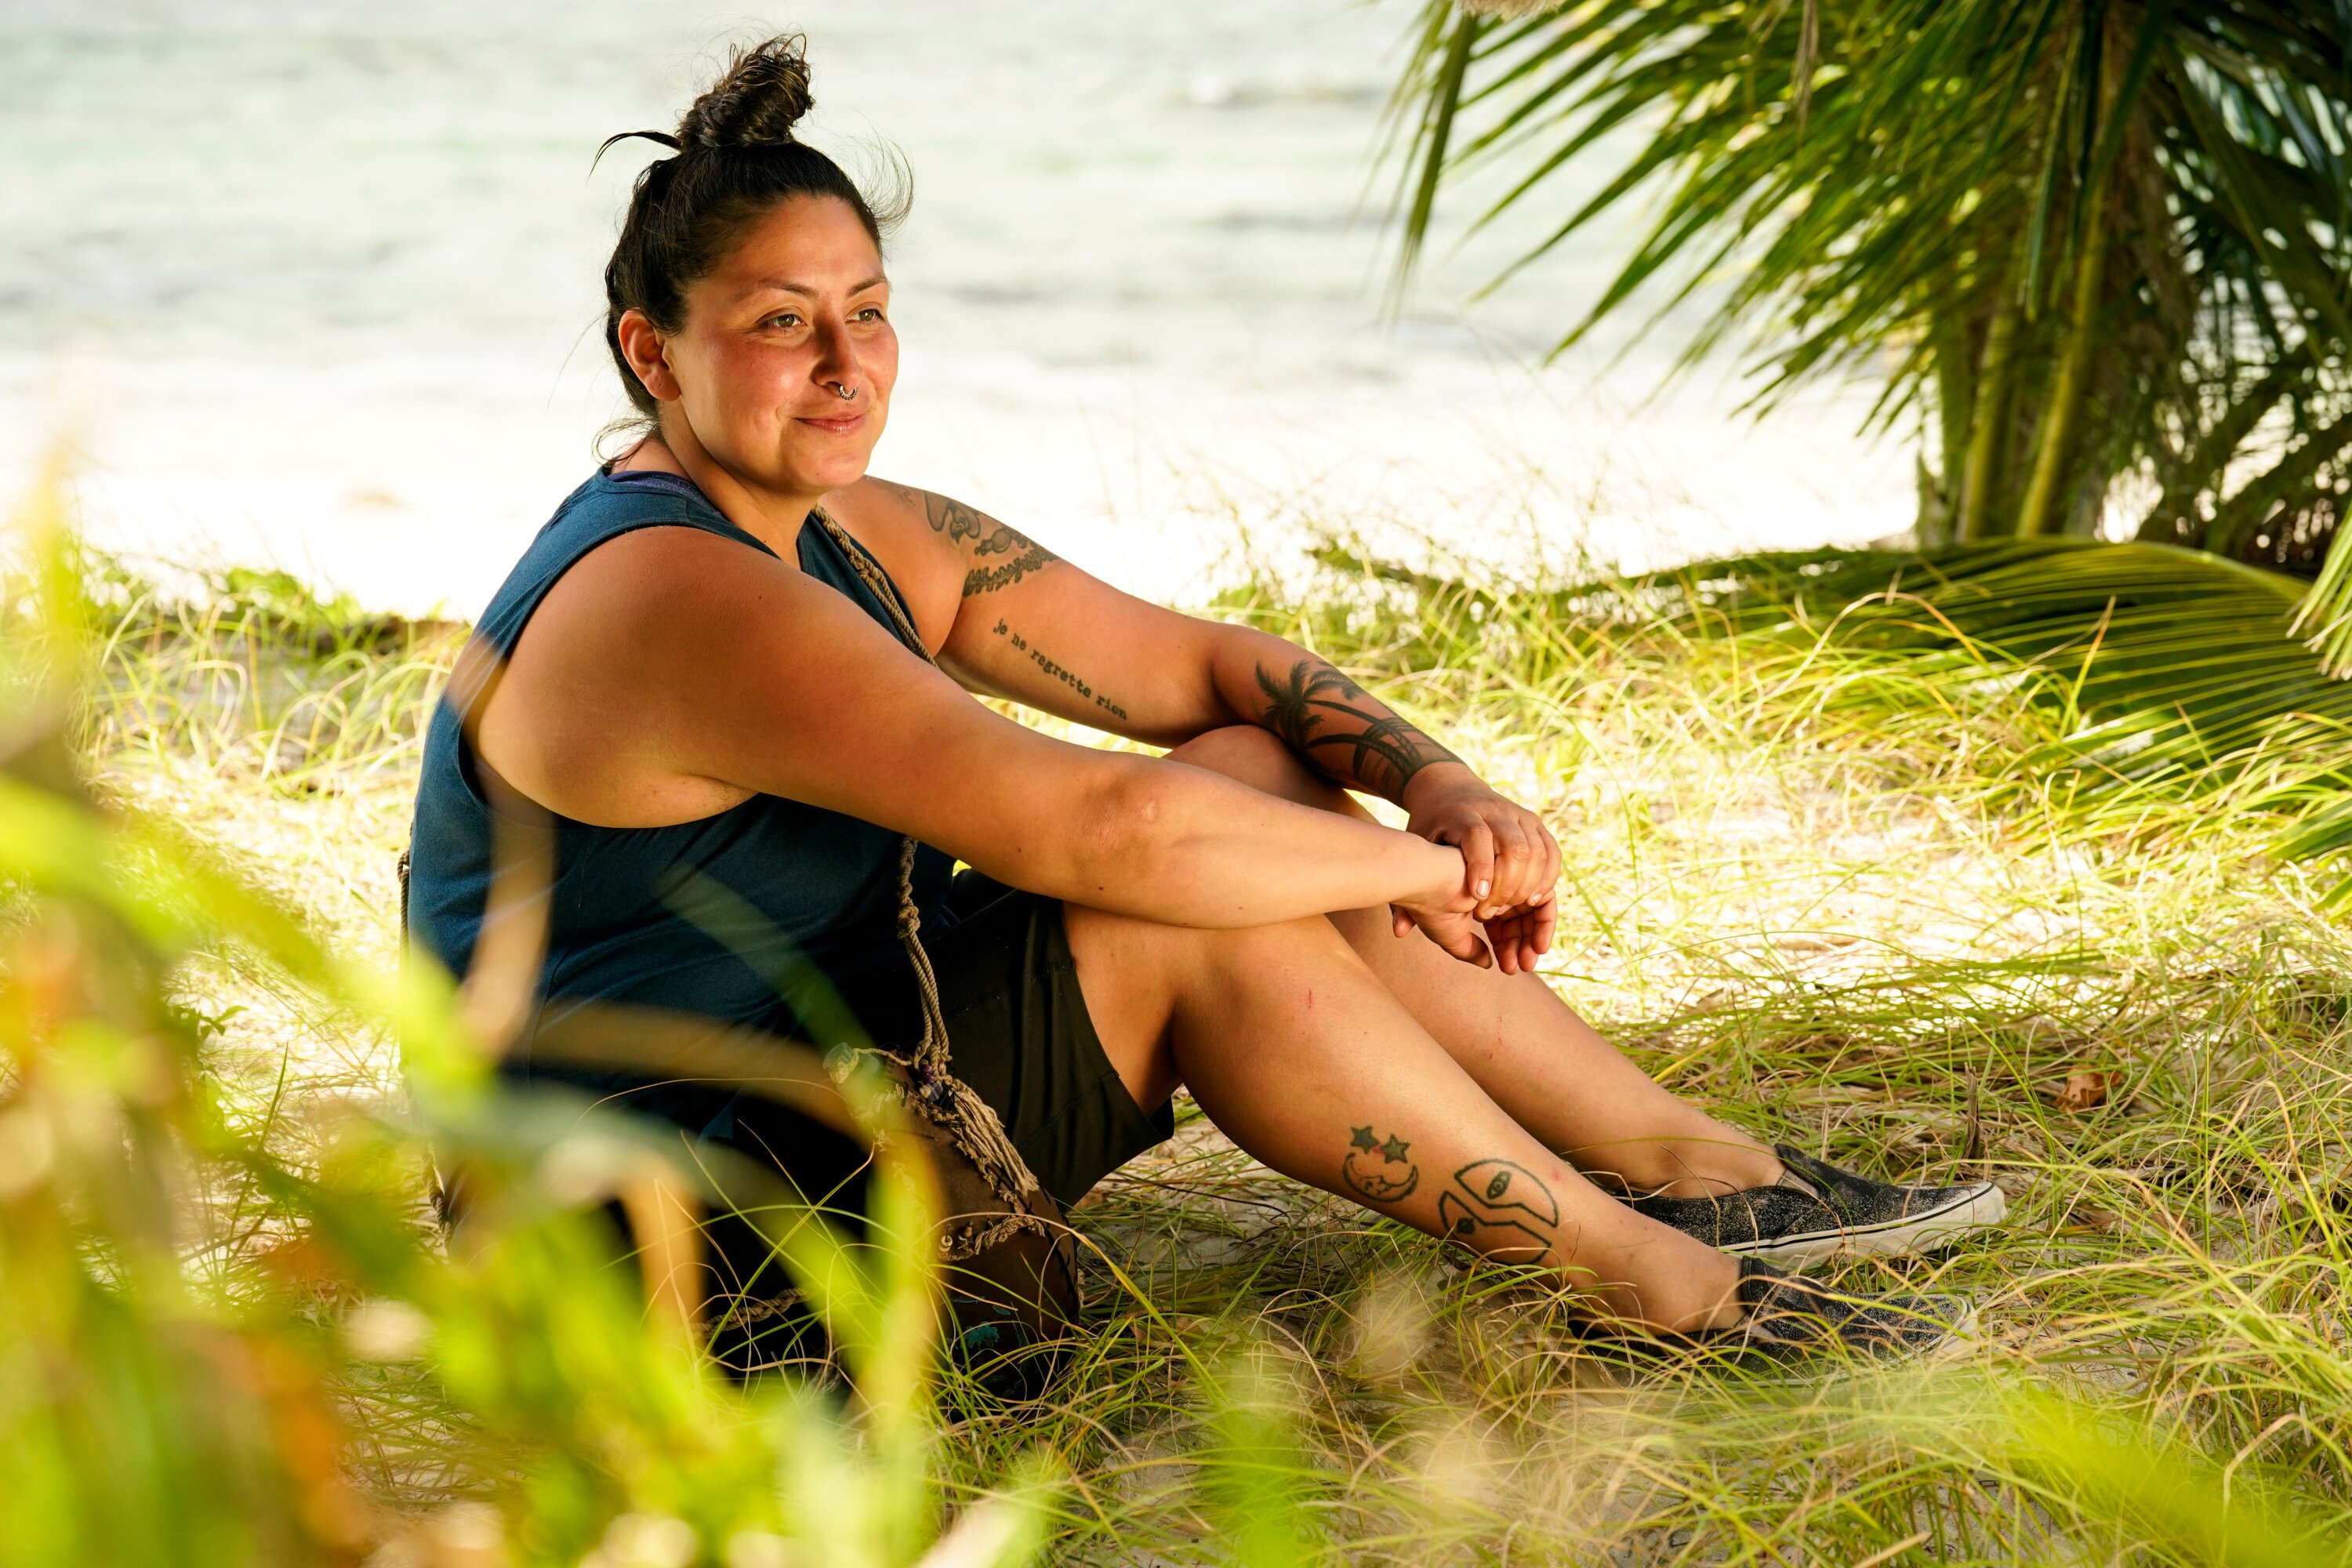 Karla Cruz Godoy, who has an immunity idol going into the merge in 'Survivor' Season 43 Episode 6, sits on the beach wearing a teal tank top and black shorts.